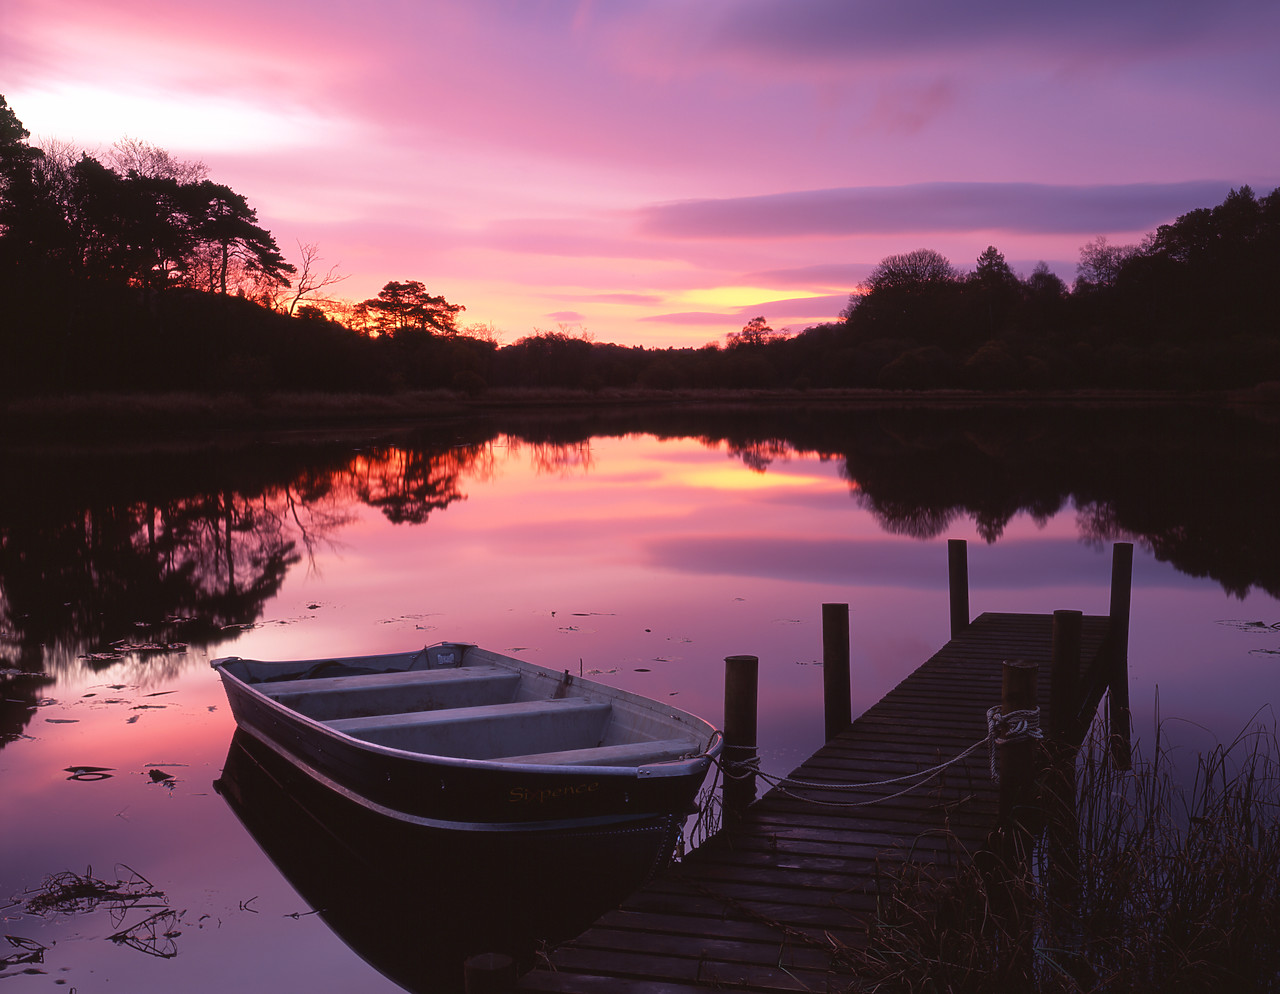 #040263-1 - Boat & Jetty at Sunrise, Elterwater, Lake District National Park, Cumbria, England